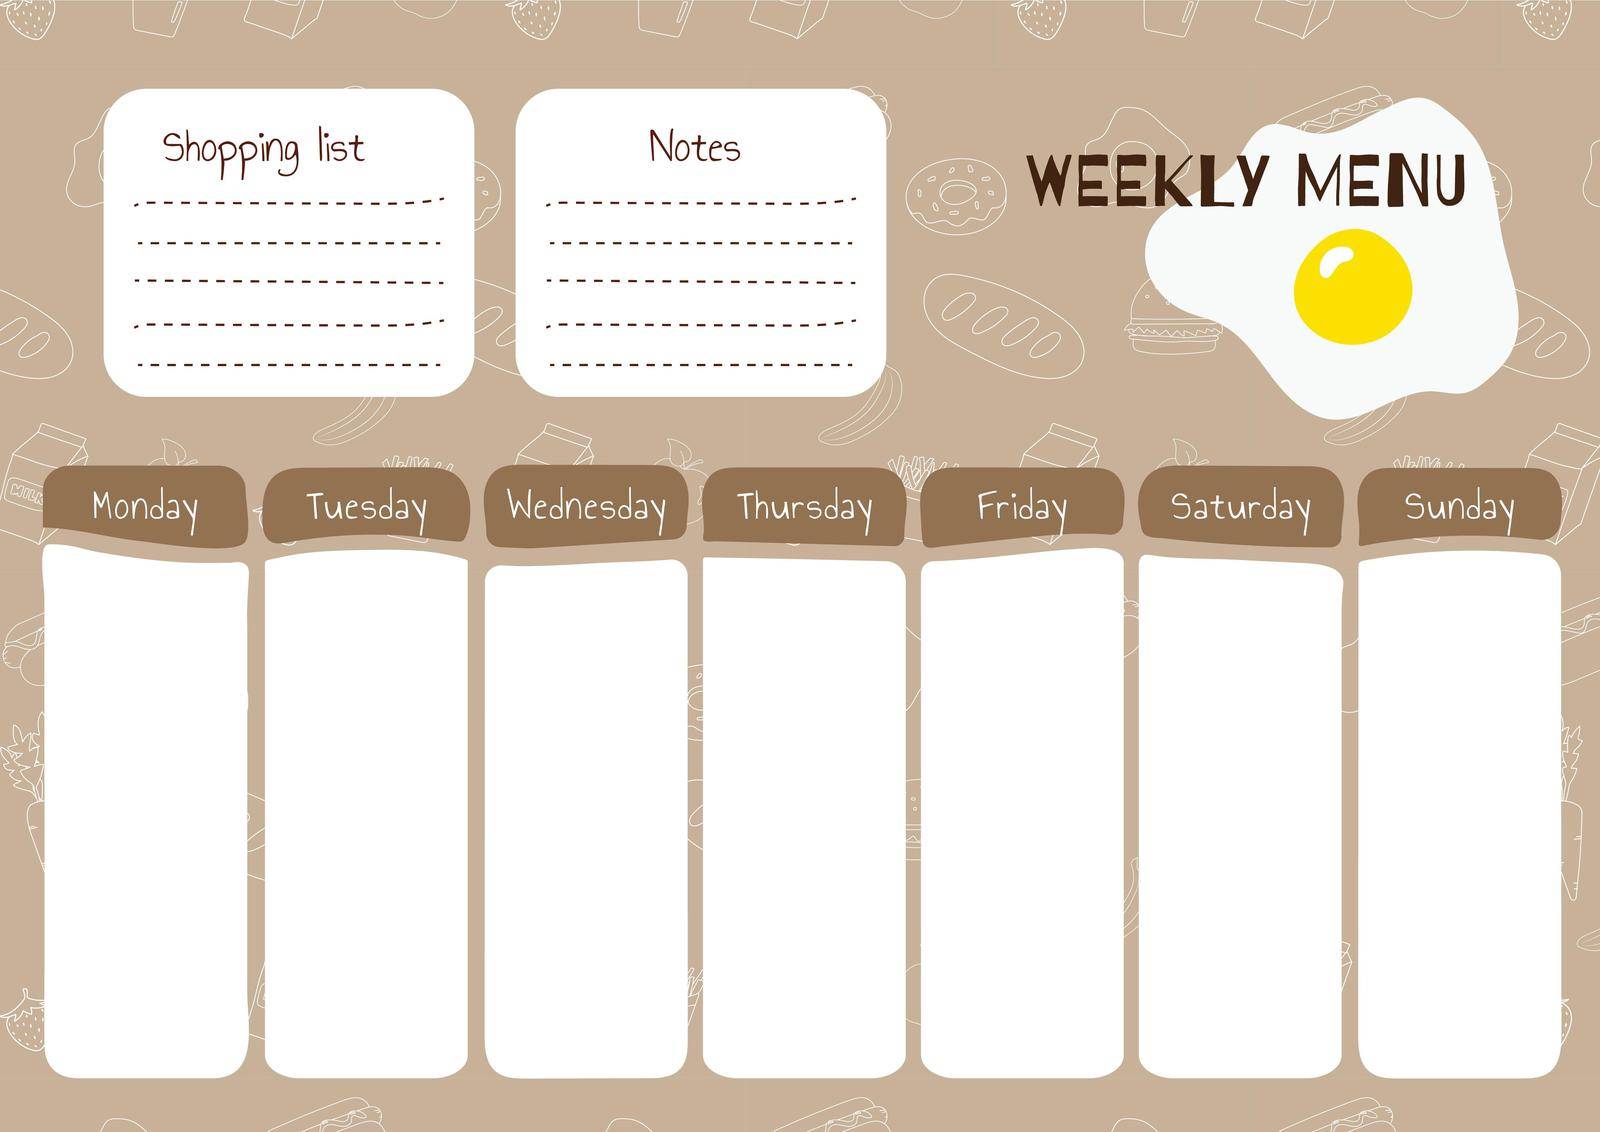 Daily shopping list in vector for every day meal menu. Food planner for healthy nutrition